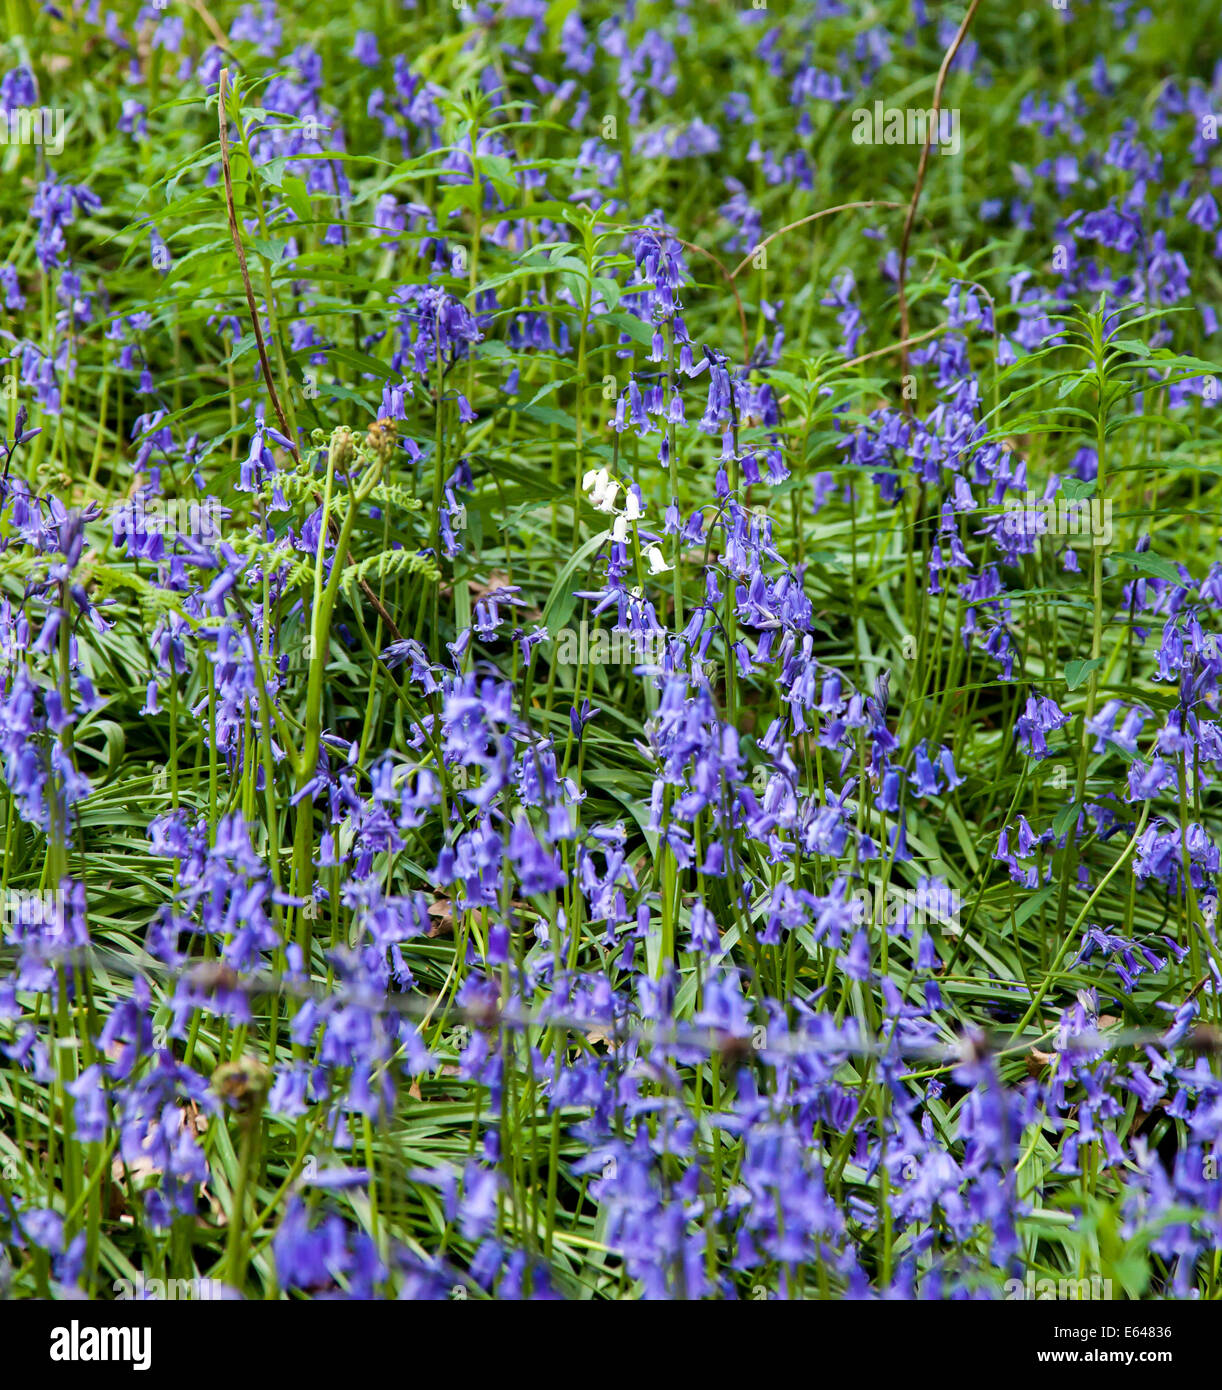 A white Common Bluebell in a patch of blue Hyacinthoides non-scripta bluebells in an English wood in spring Stock Photo